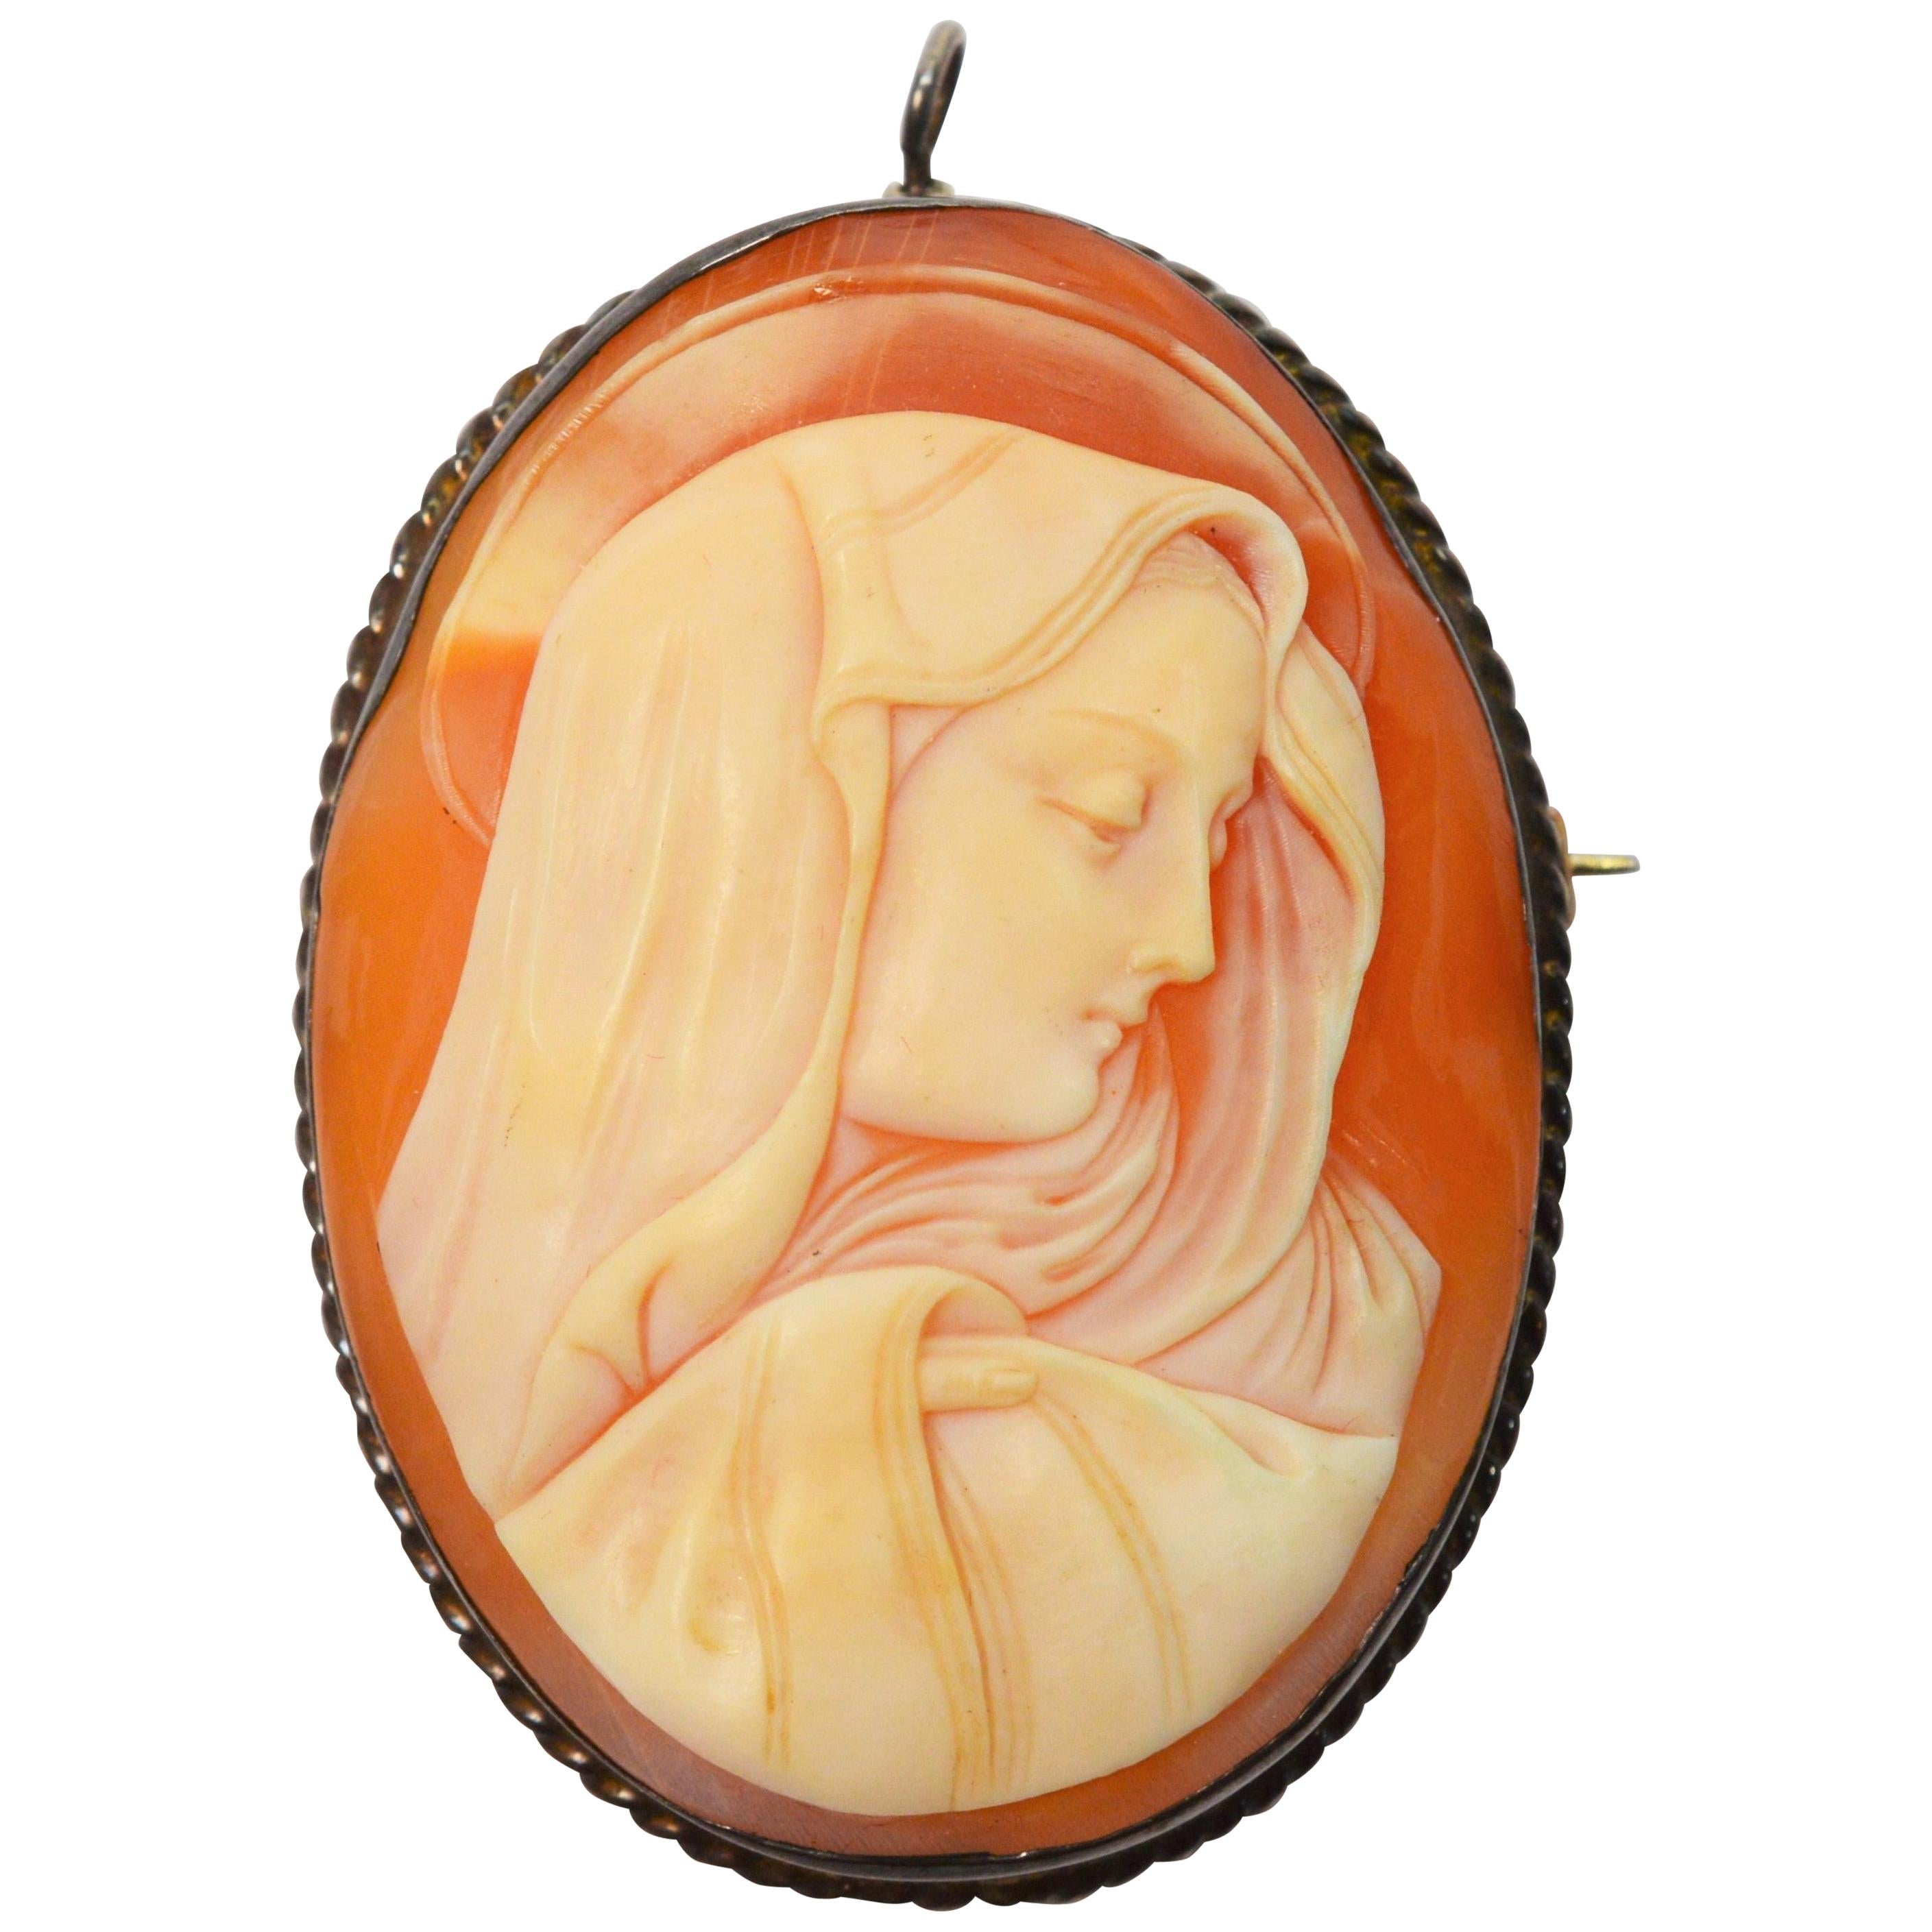 Antique Madonna Shell Sterling Silver Cameo Brooch Pendant